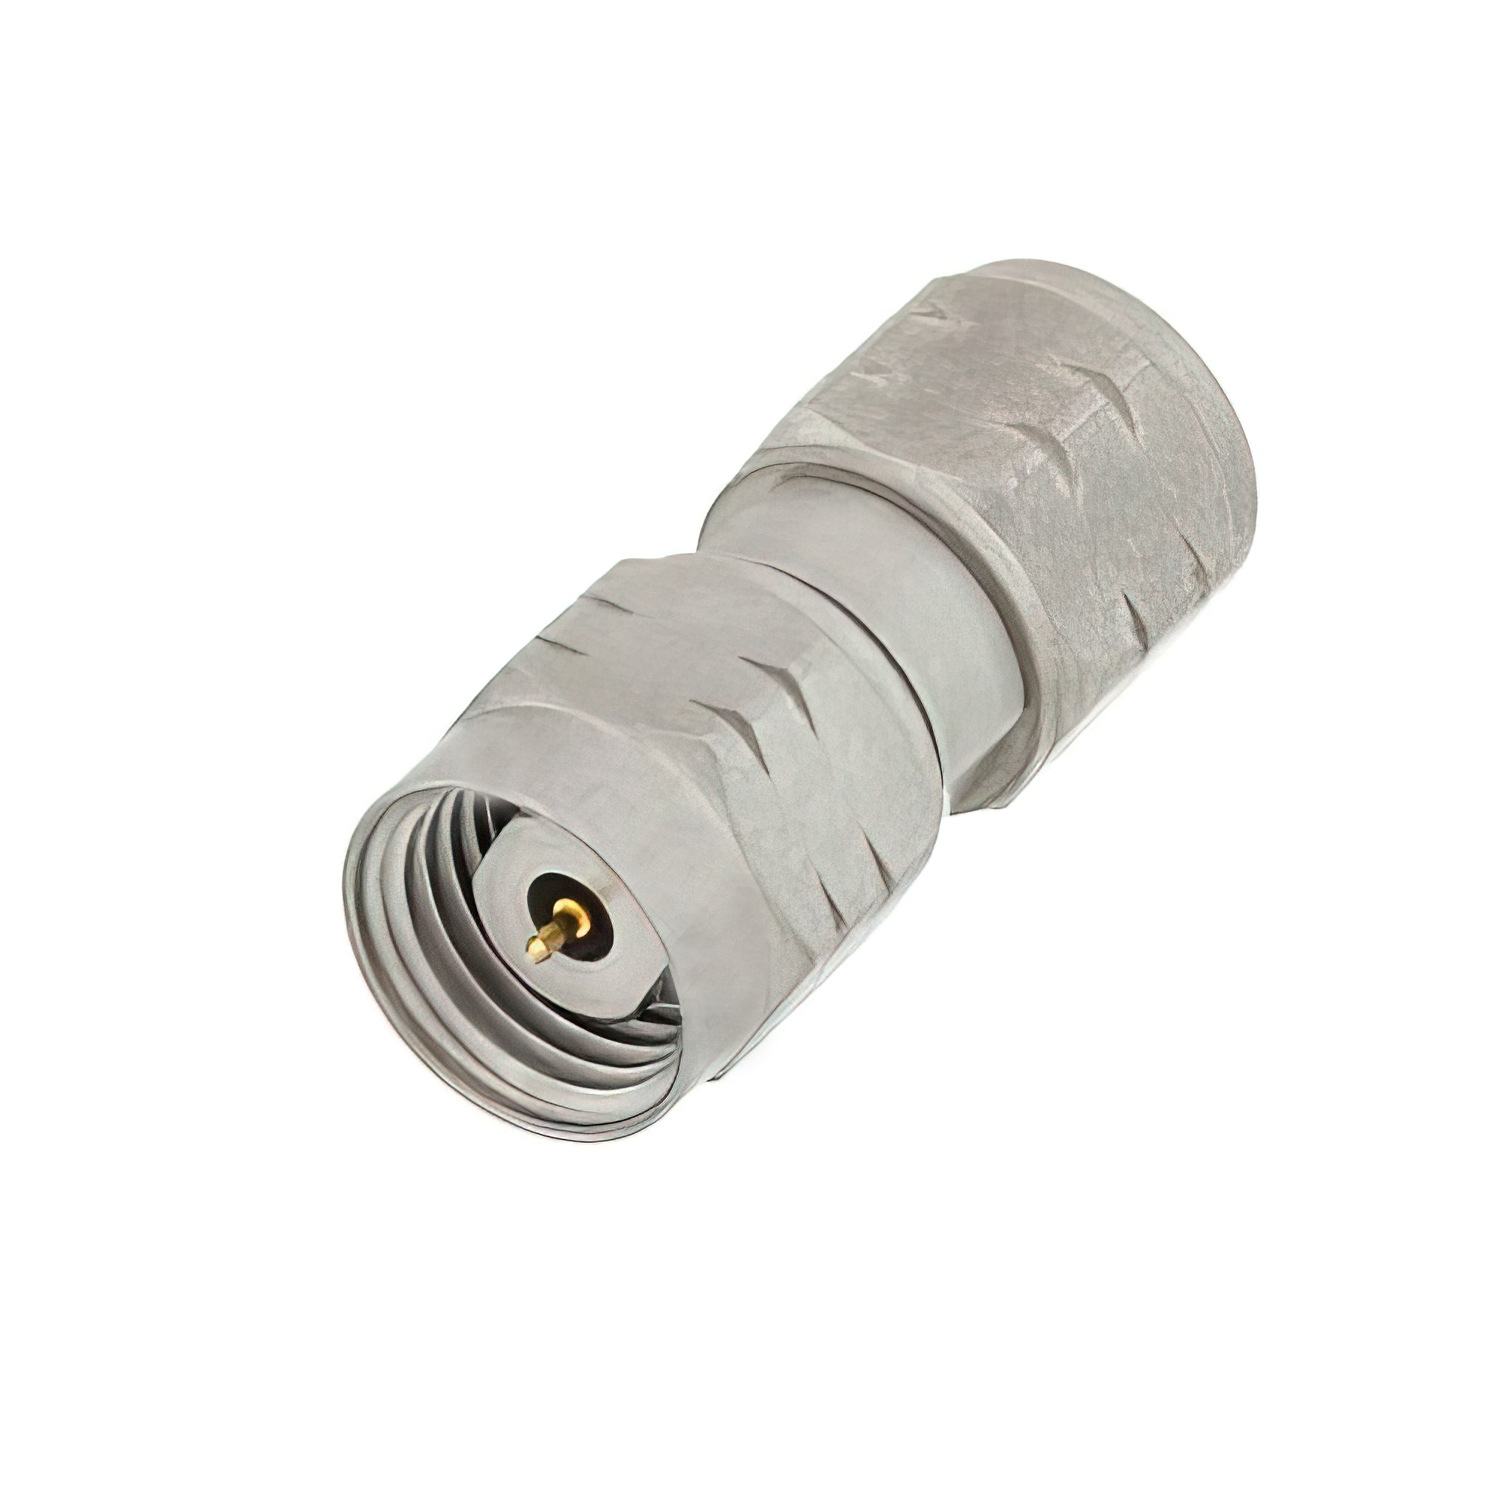 1.85mm Male to 1.85mm Male Adapter 2